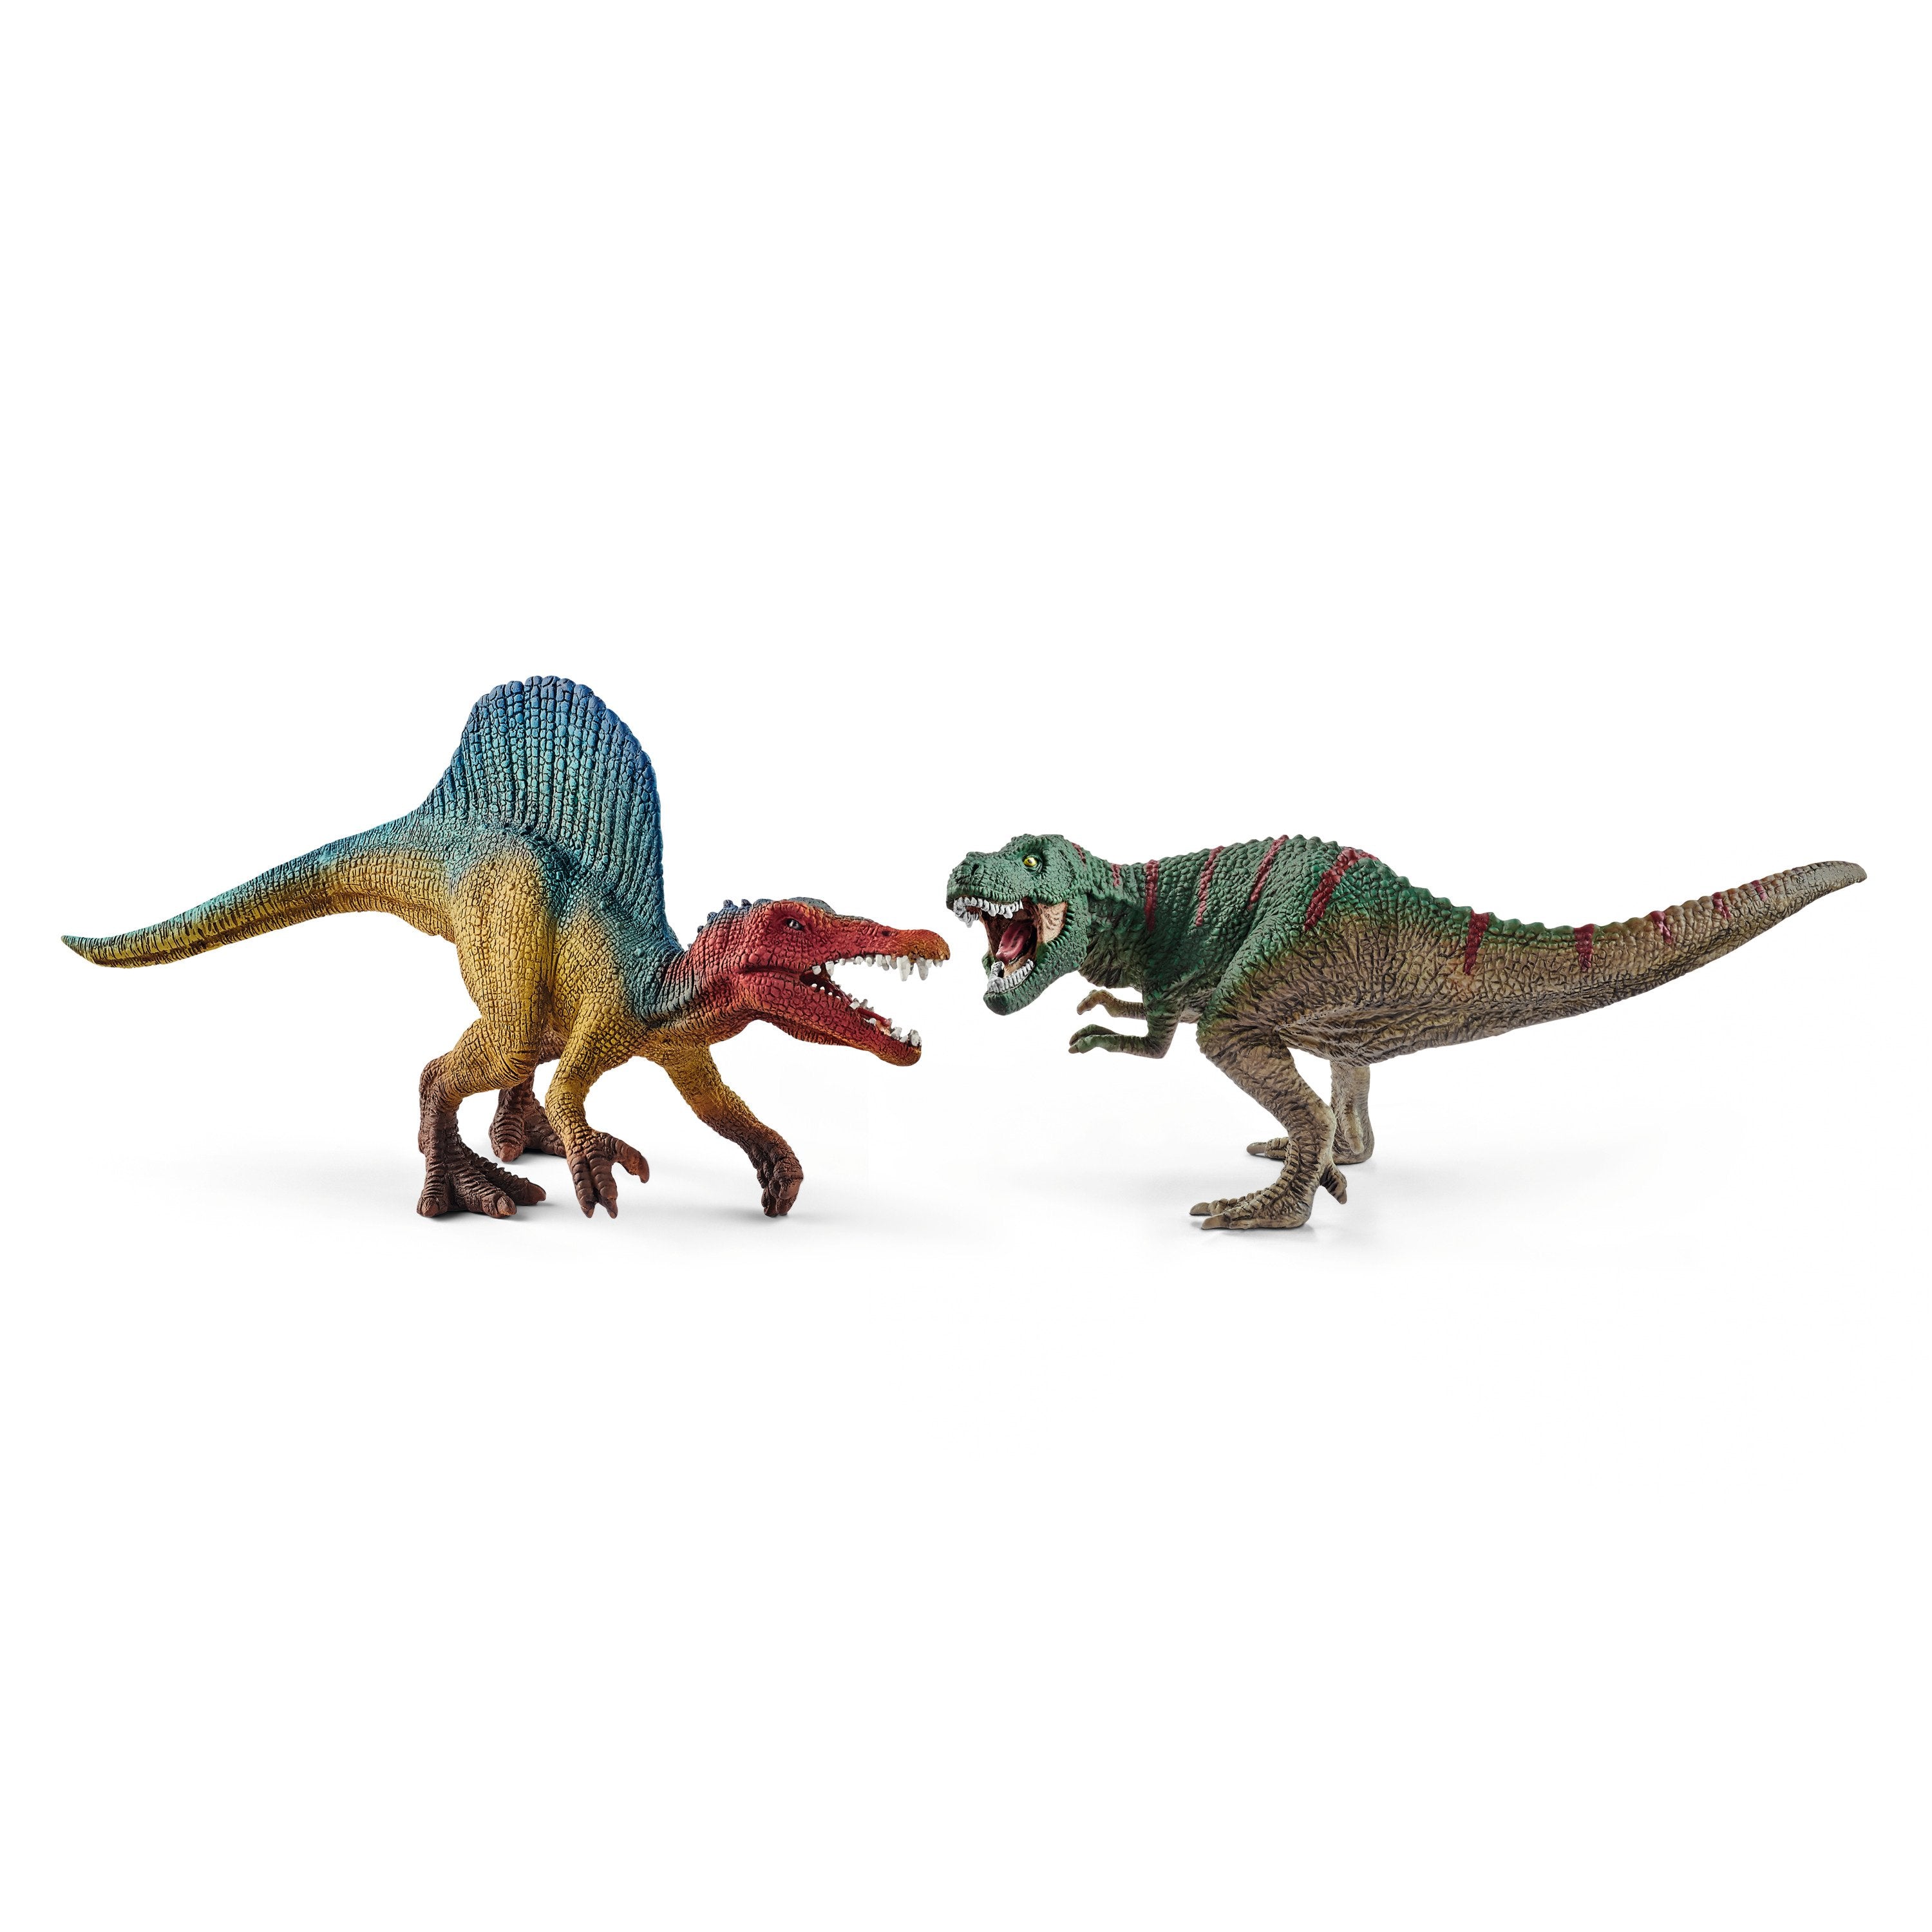 Schleich Dinosaurs Spinosaurus and T-Rex Small Toy Figure Set